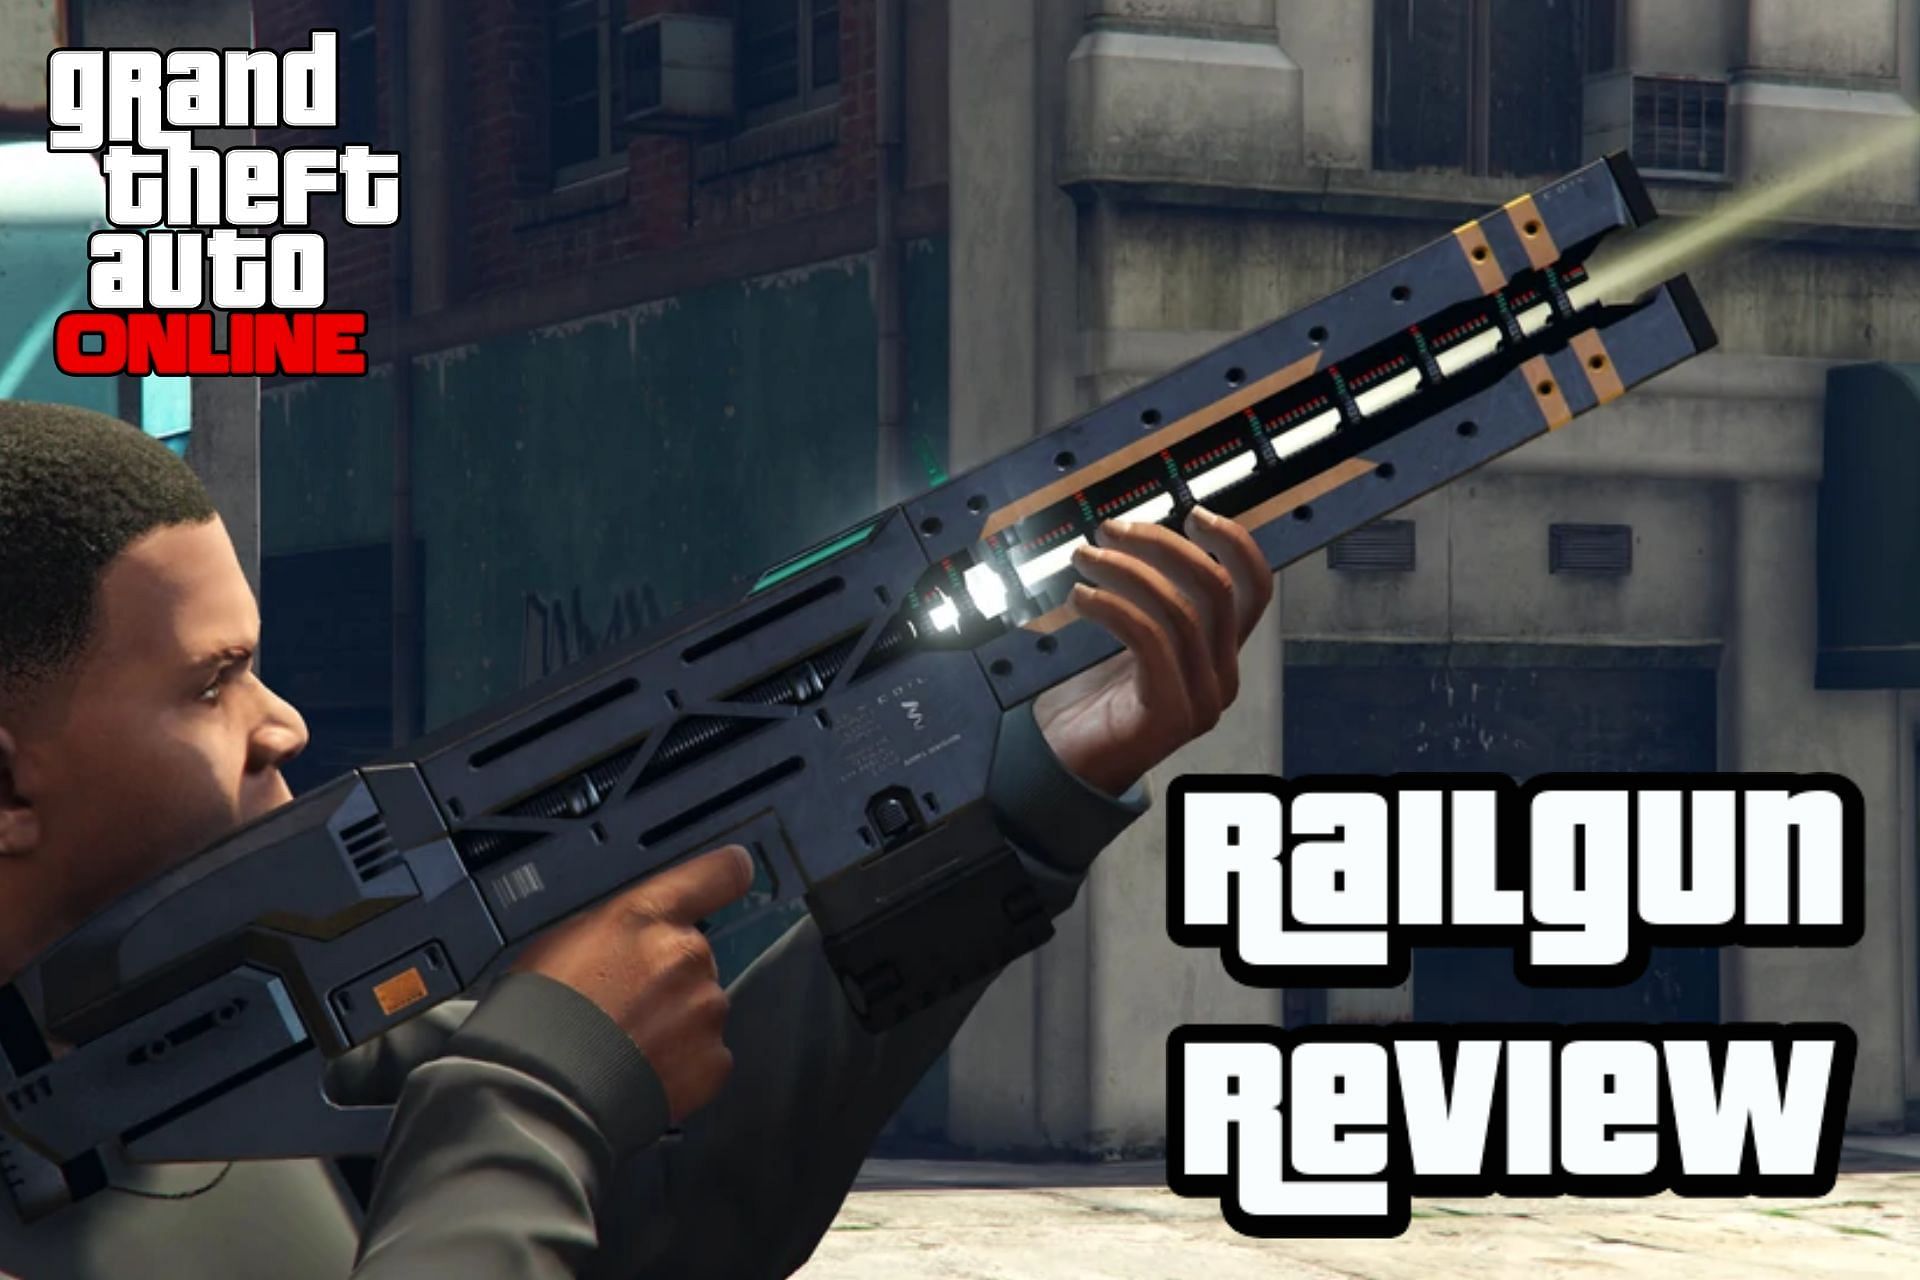 The Railgun is one of the most powerful weapons in GTA Online (Image via Rockstar Games)